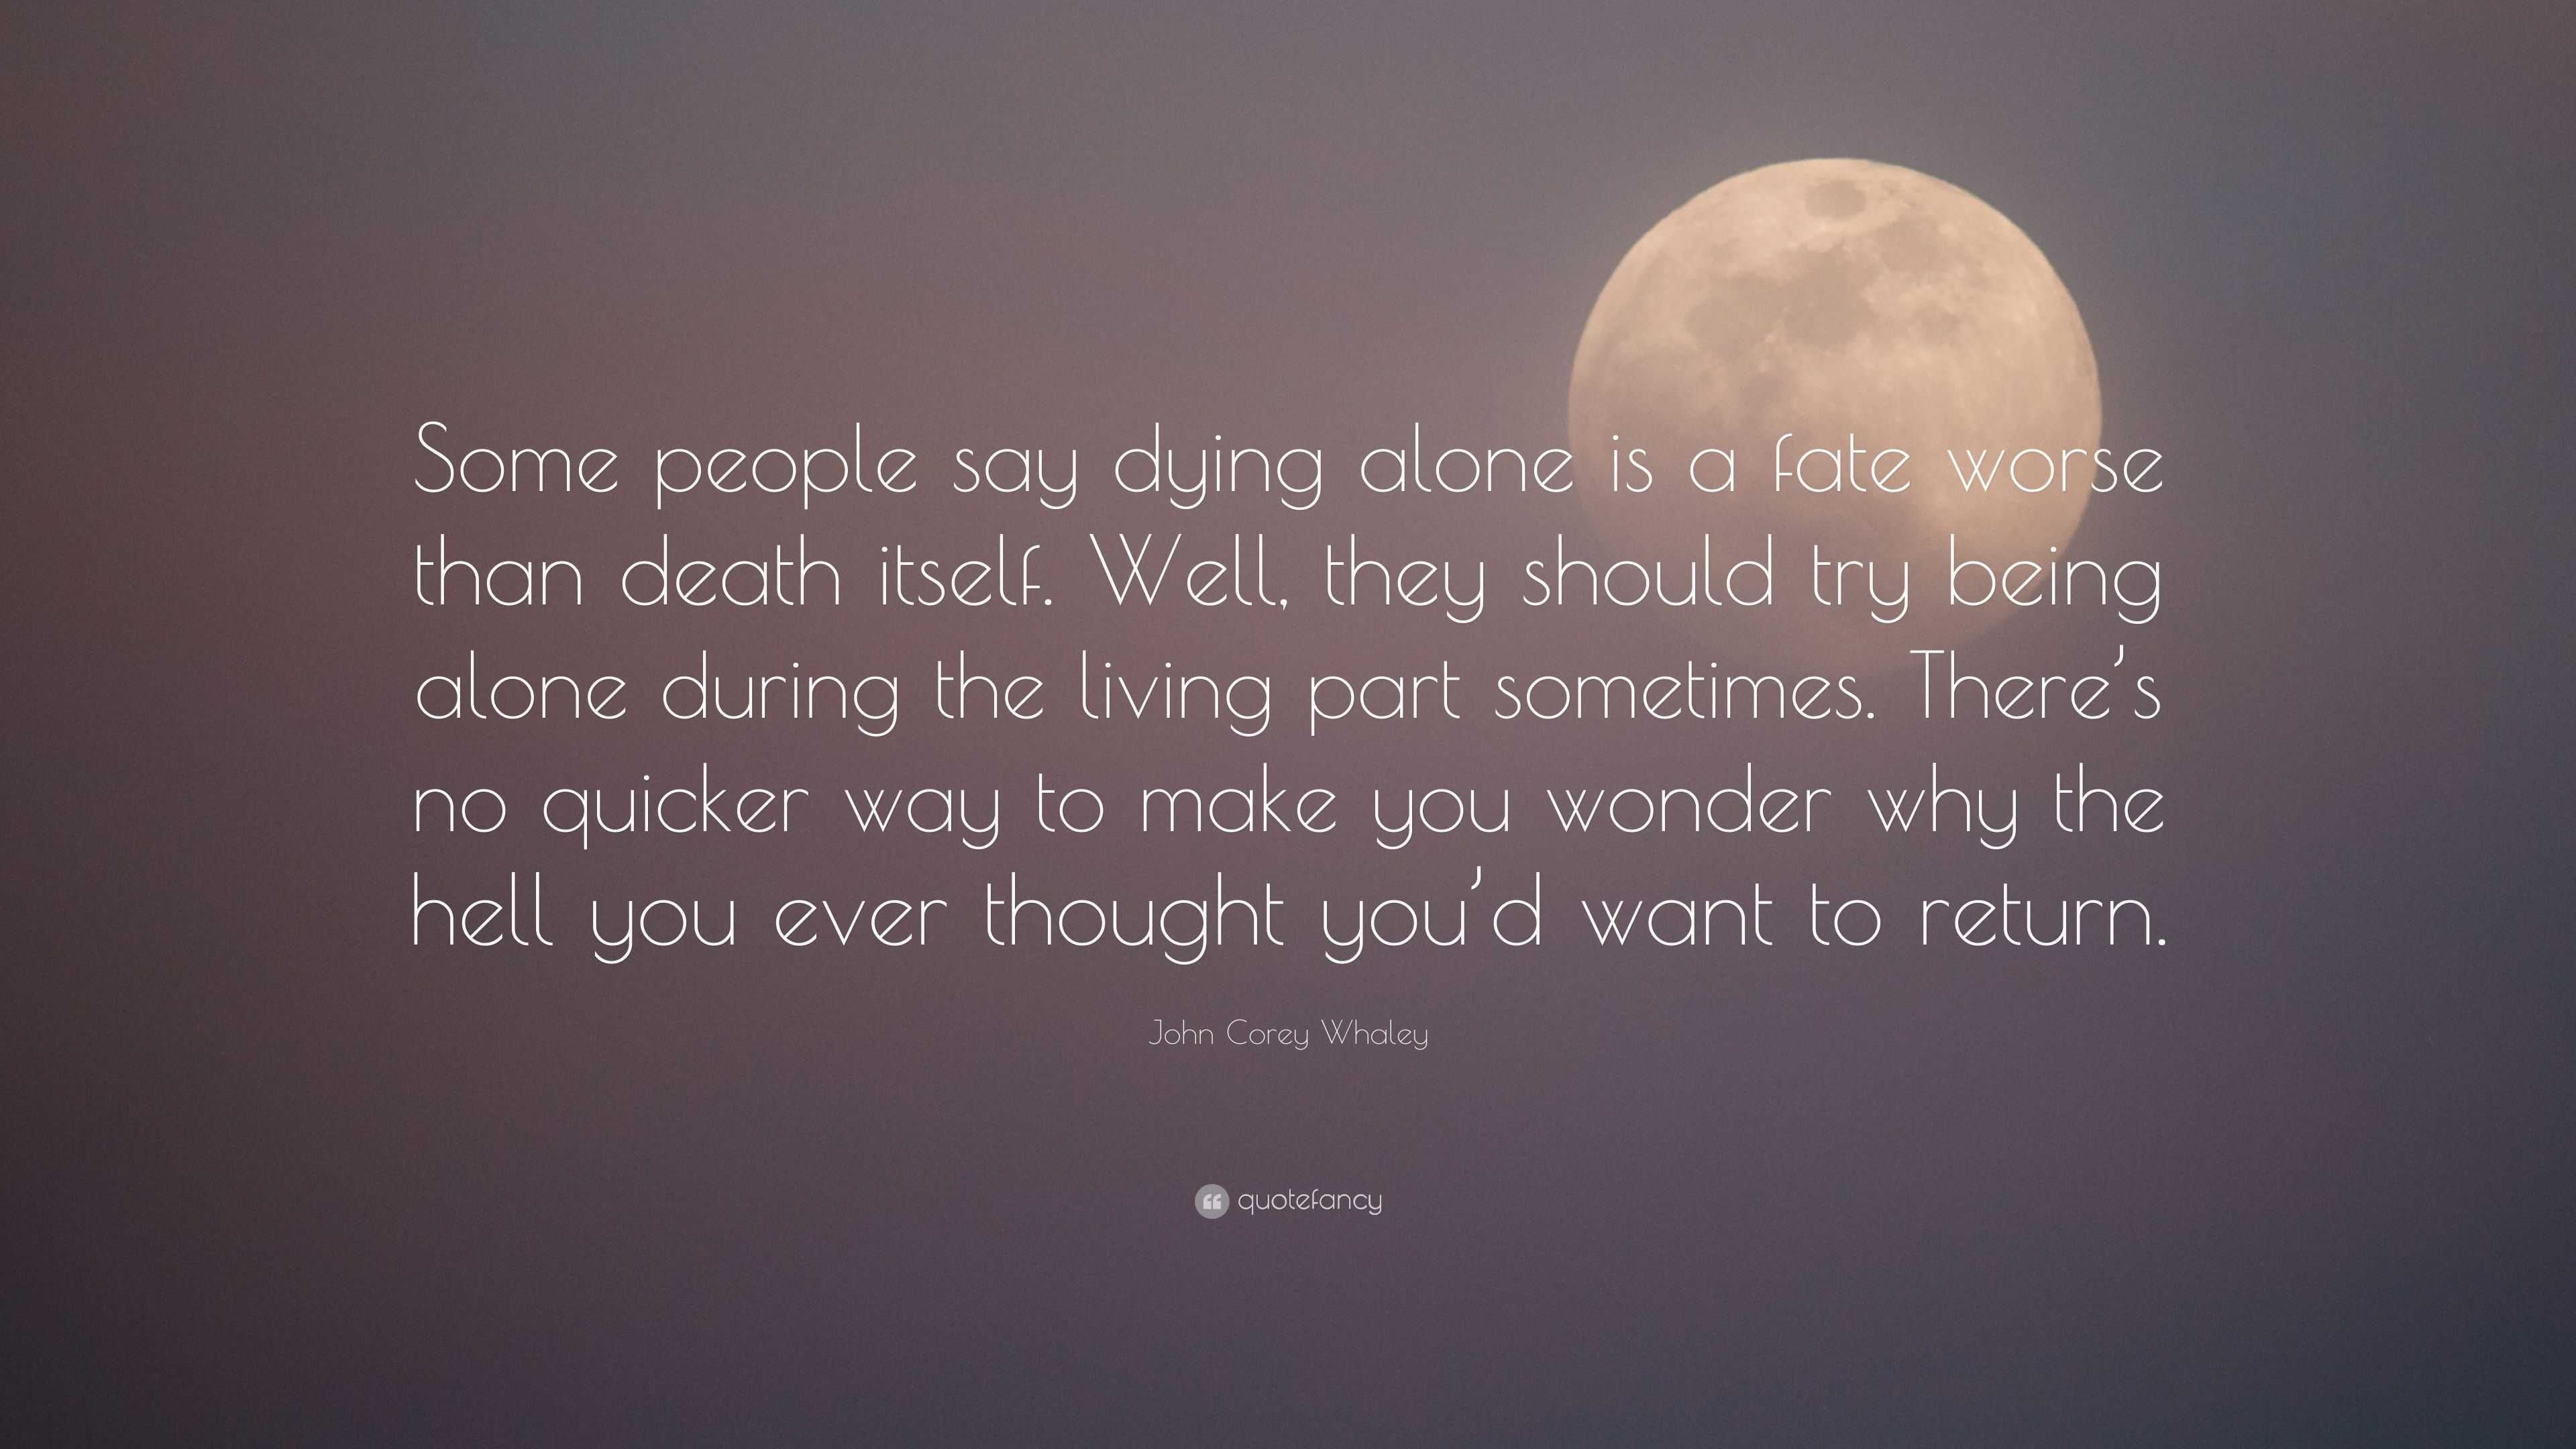 John Corey Whaley Quote: "Some people say dying alone is a fate worse than death itself. Well ...